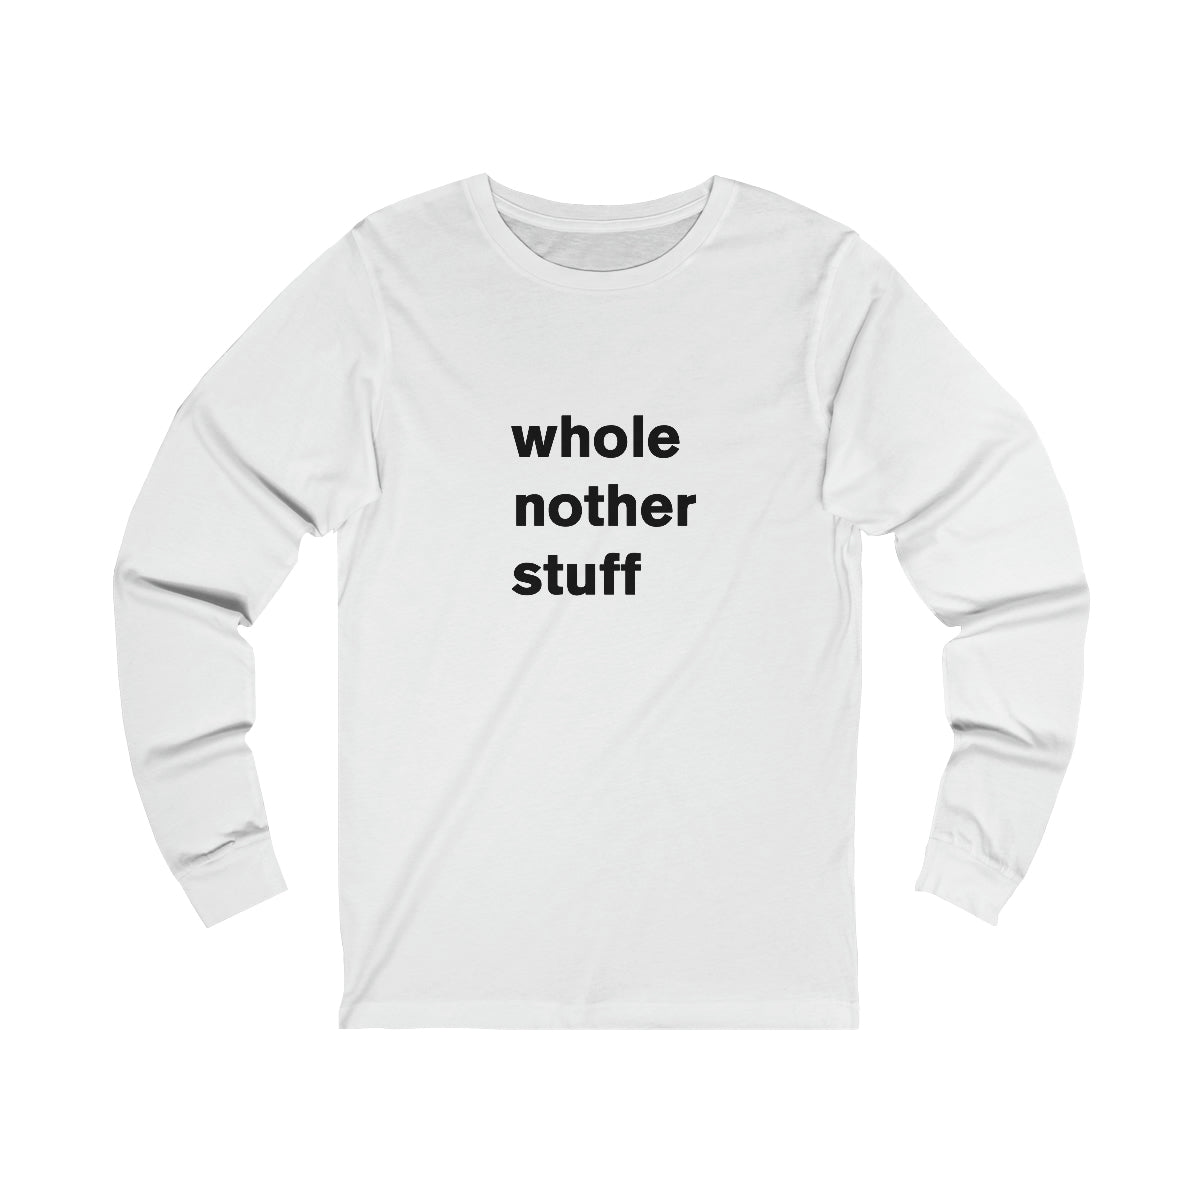 whole nother stuff - long sleeve